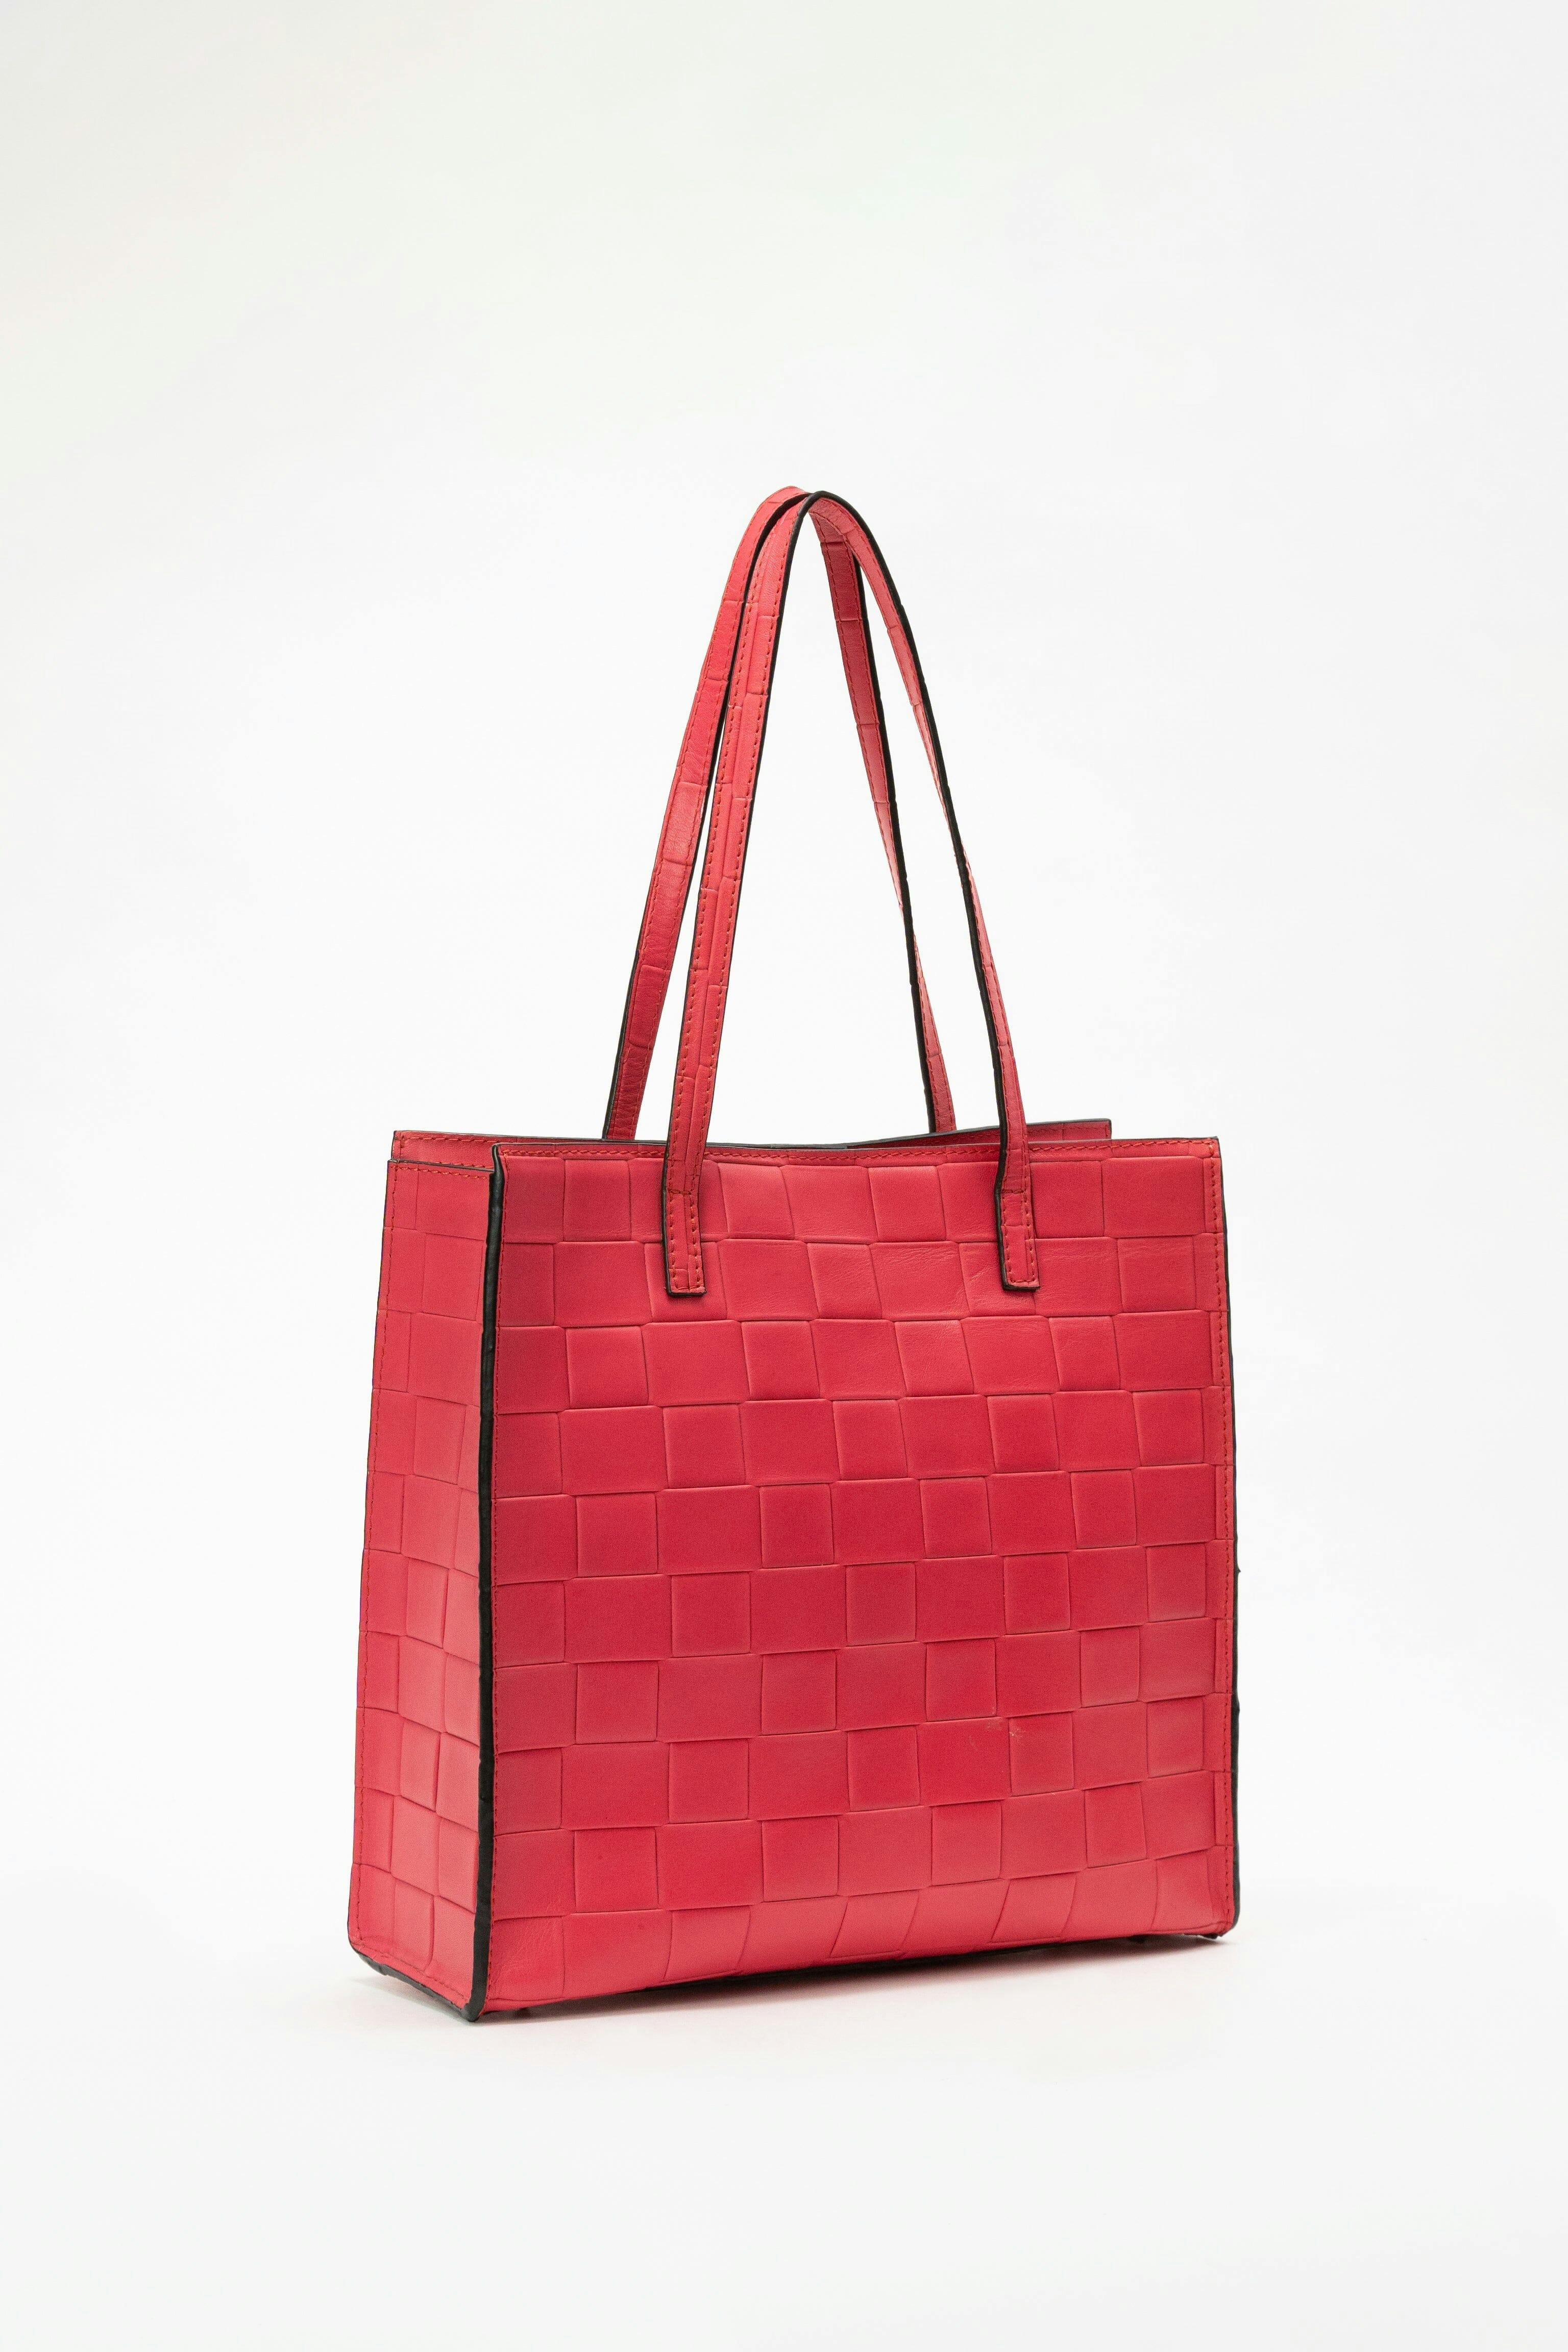 Eli Tote in Pink Checkered, a product by Mistry 